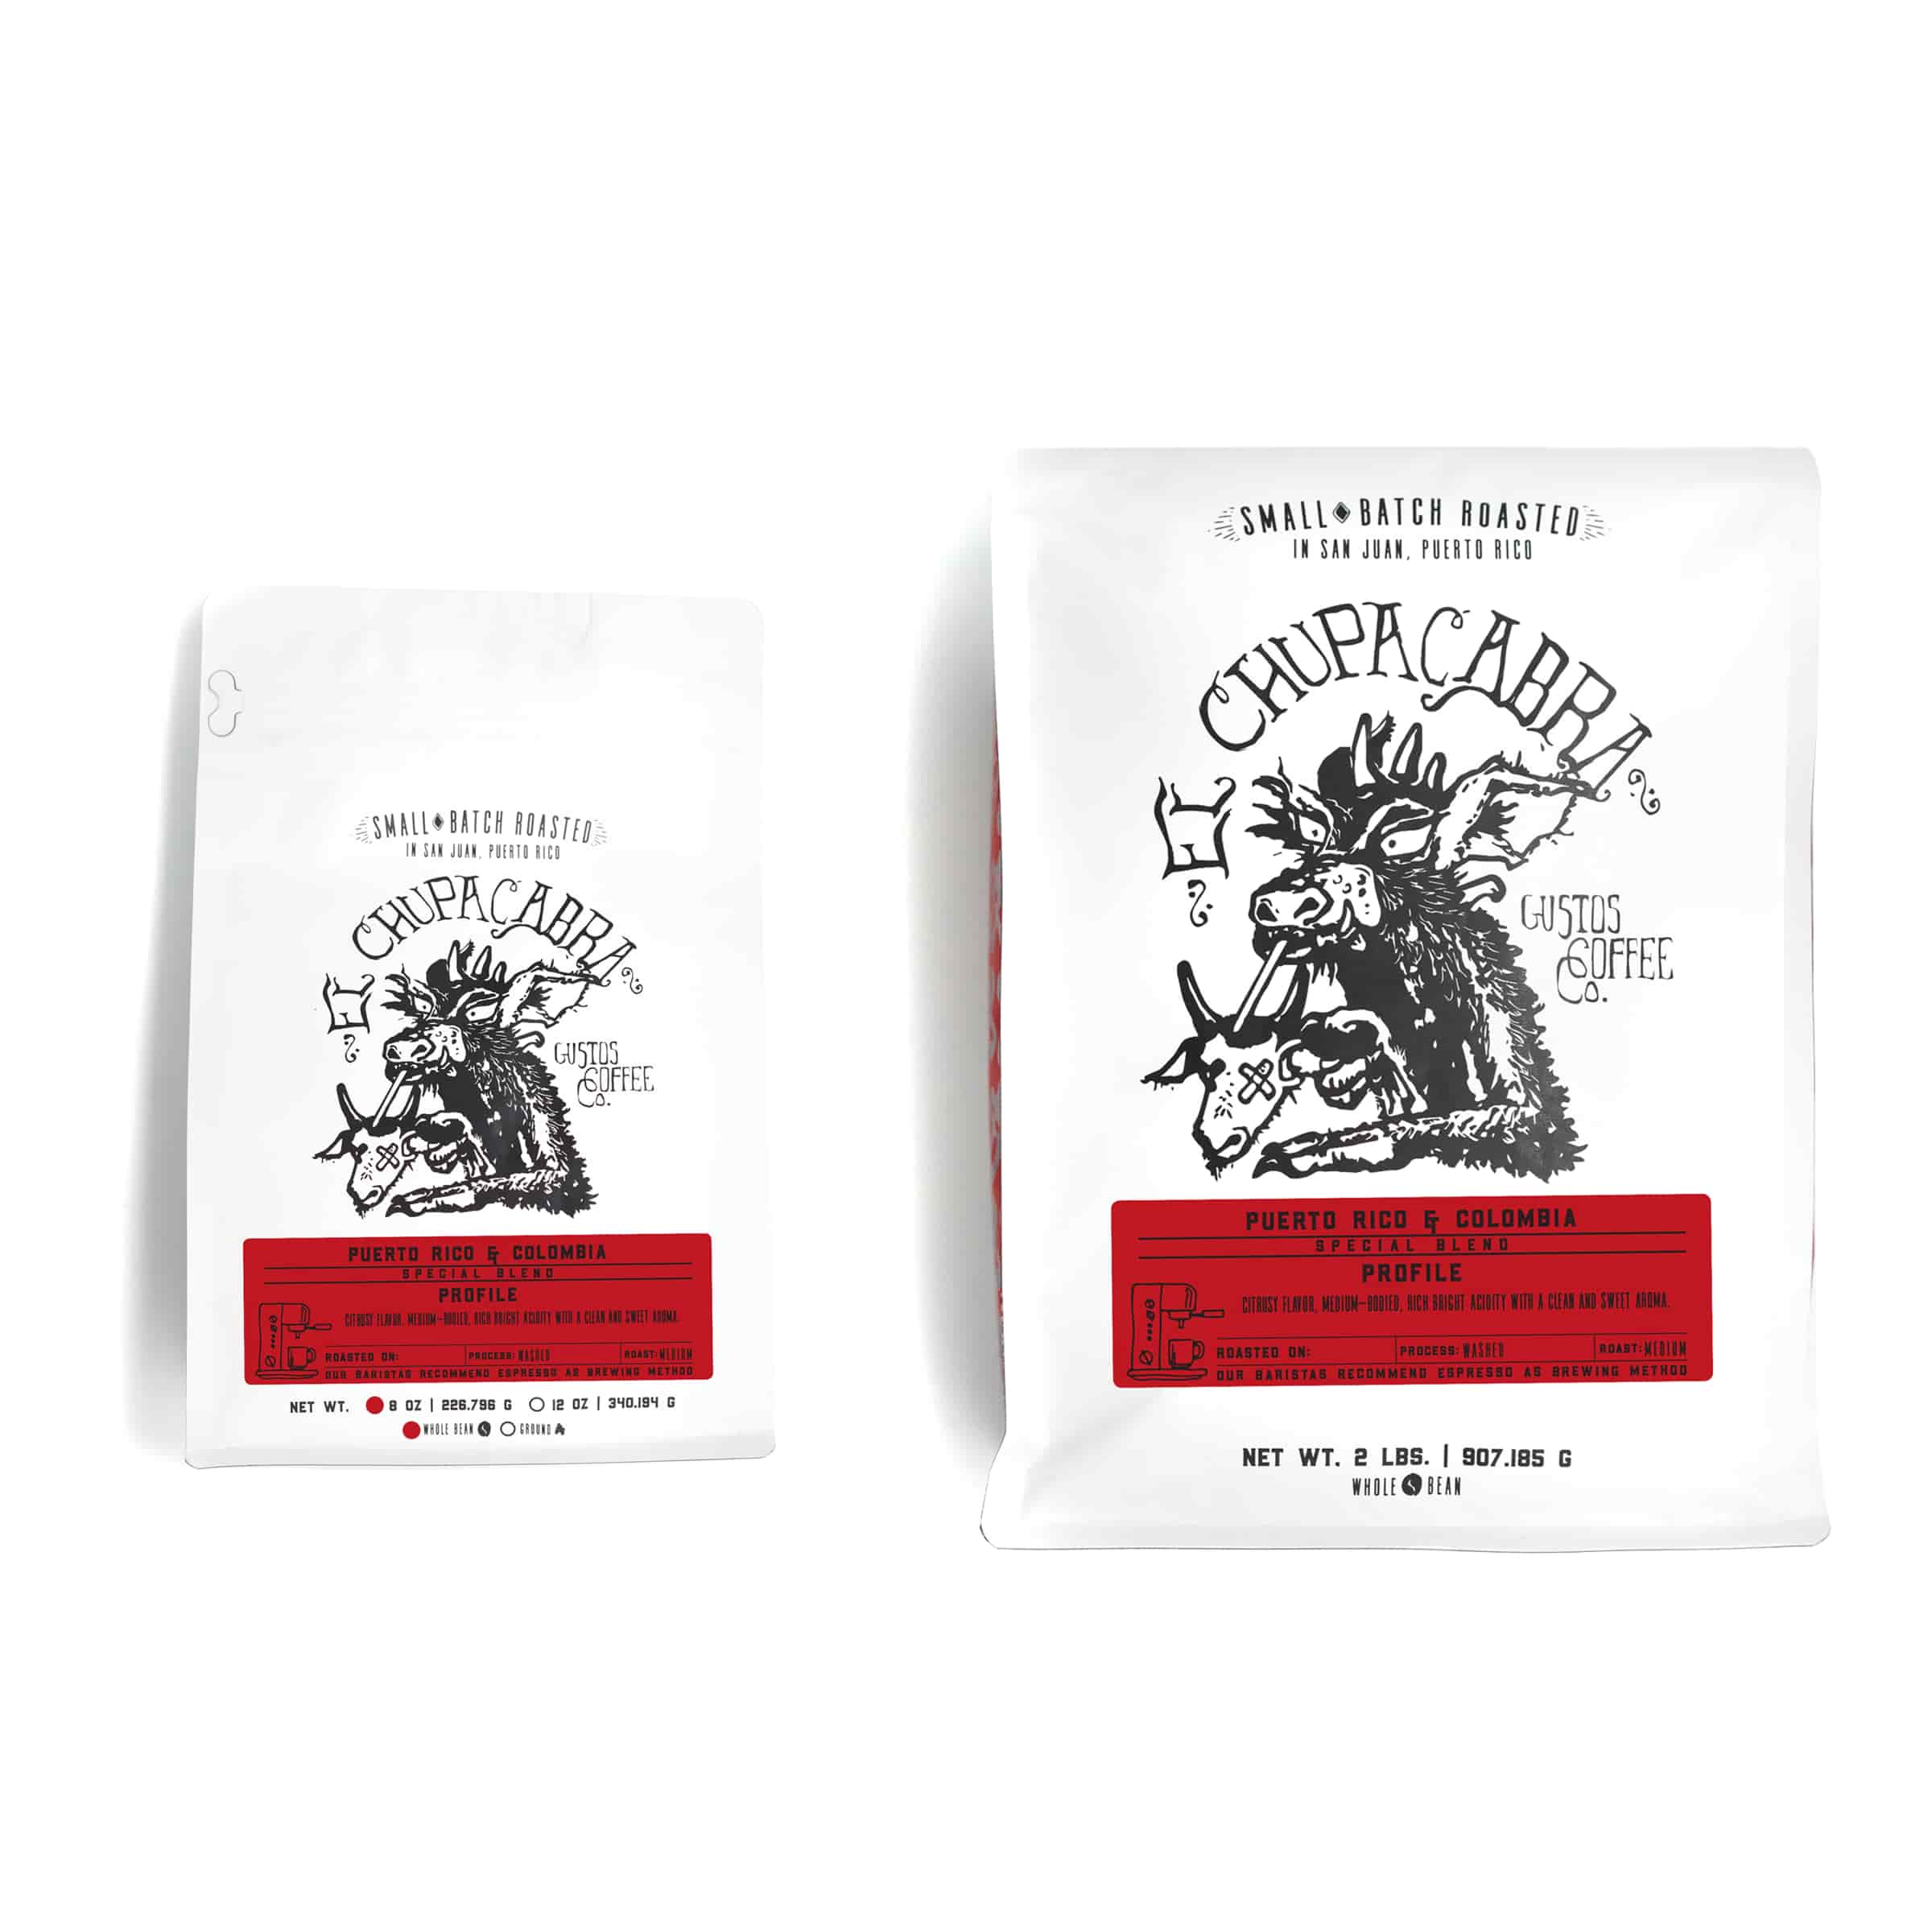 Two special coffee blends side by side over a white background. El Chupacabra PR x Colombia Specialty coffee from Gustos Coffee co